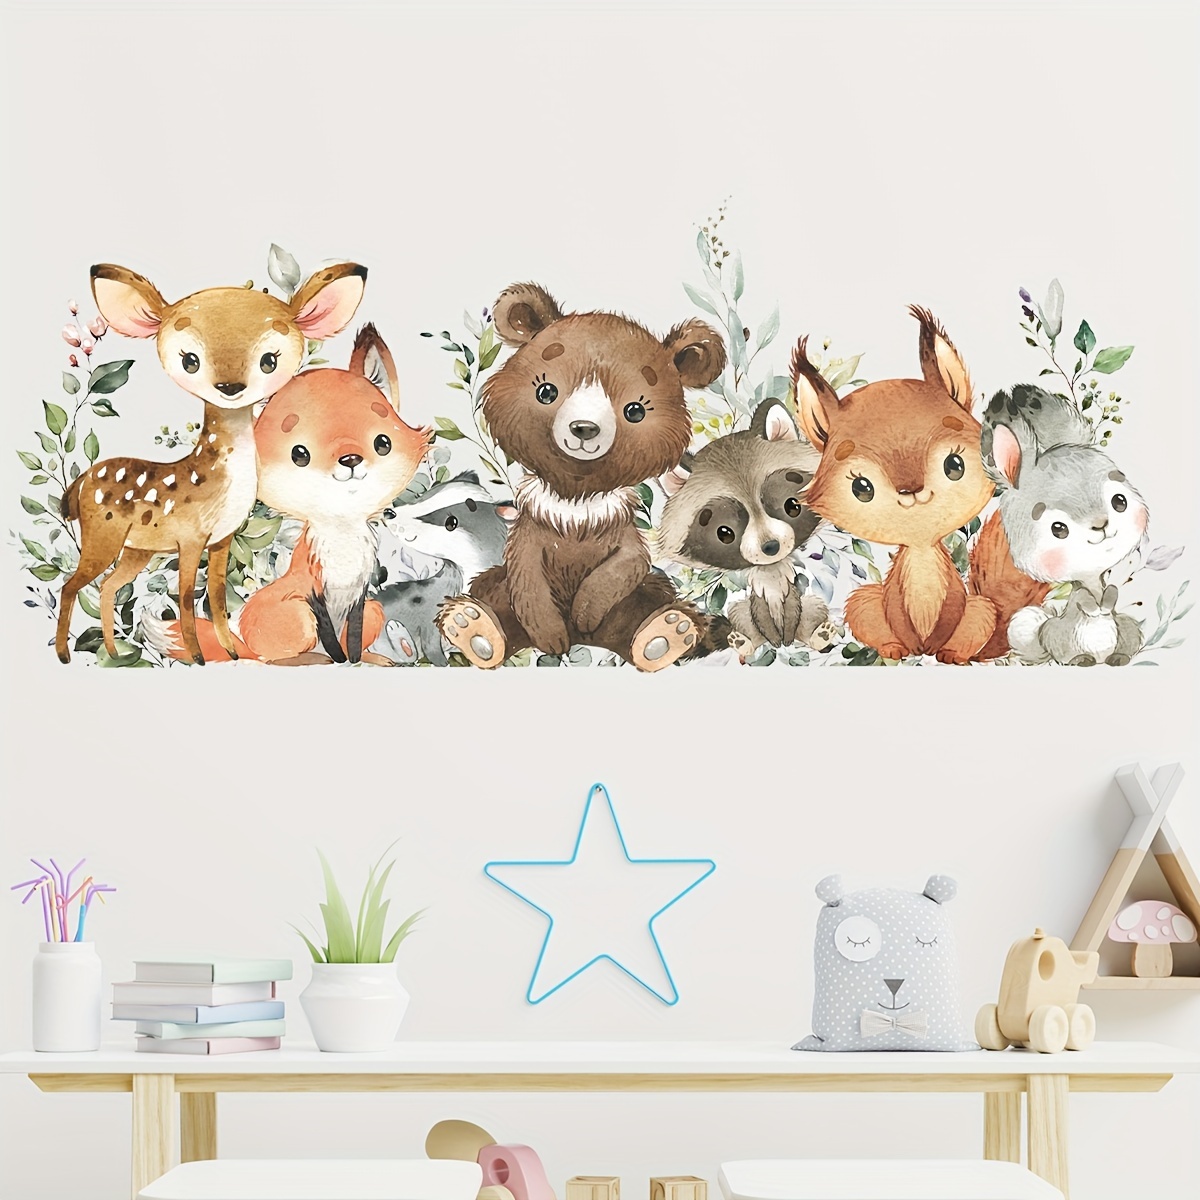 

Charming Animal Wall Decals - Self-adhesive, Removable Stickers With Deer, Raccoon, Rabbit & Bear Designs For Bedroom, Living Room, Entryway - Matte Finish Pvc Home Decor By Brup